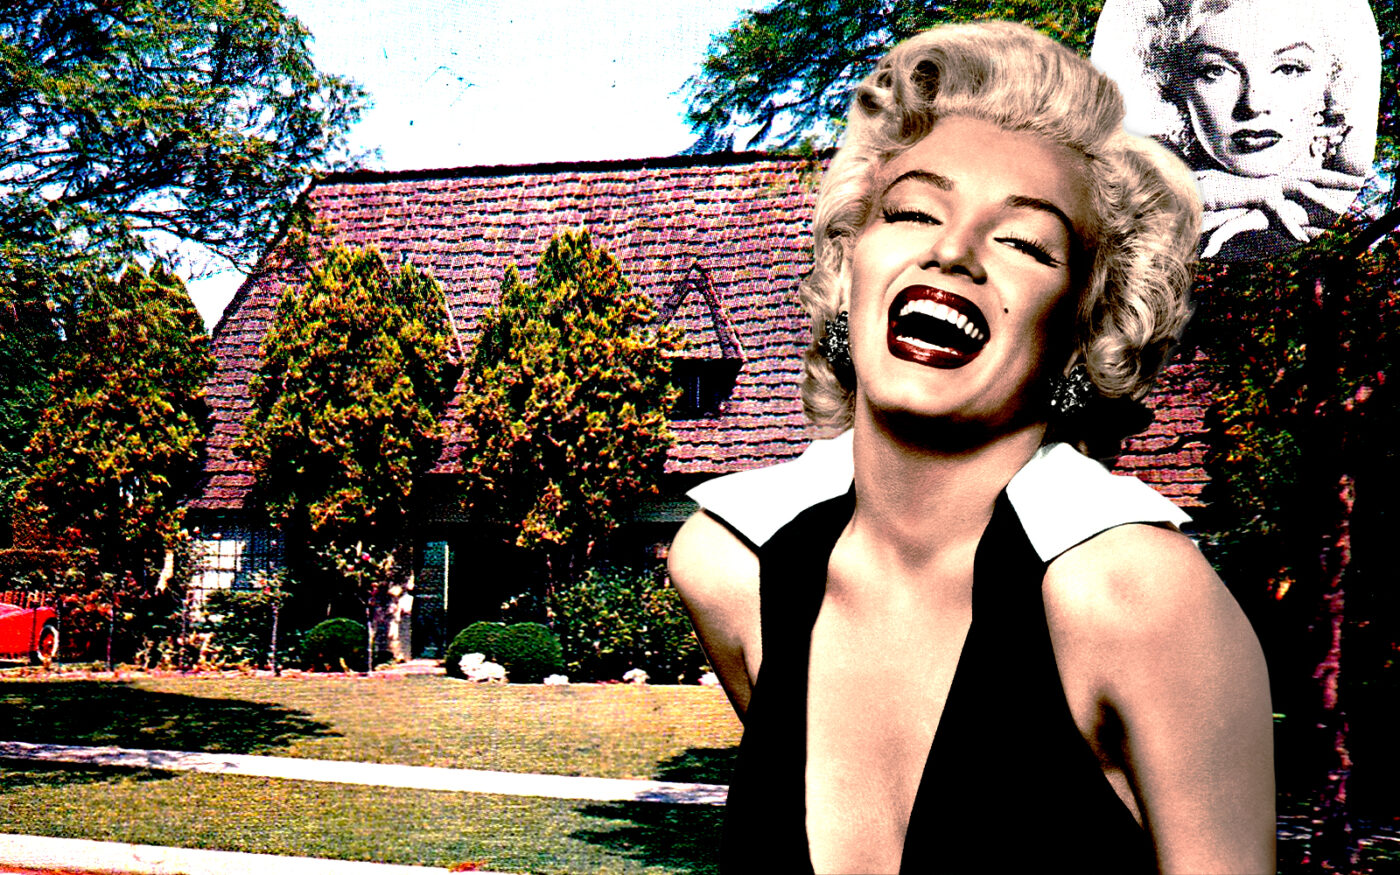 LA City Council Saves Marilyn Monroe House From Demolition